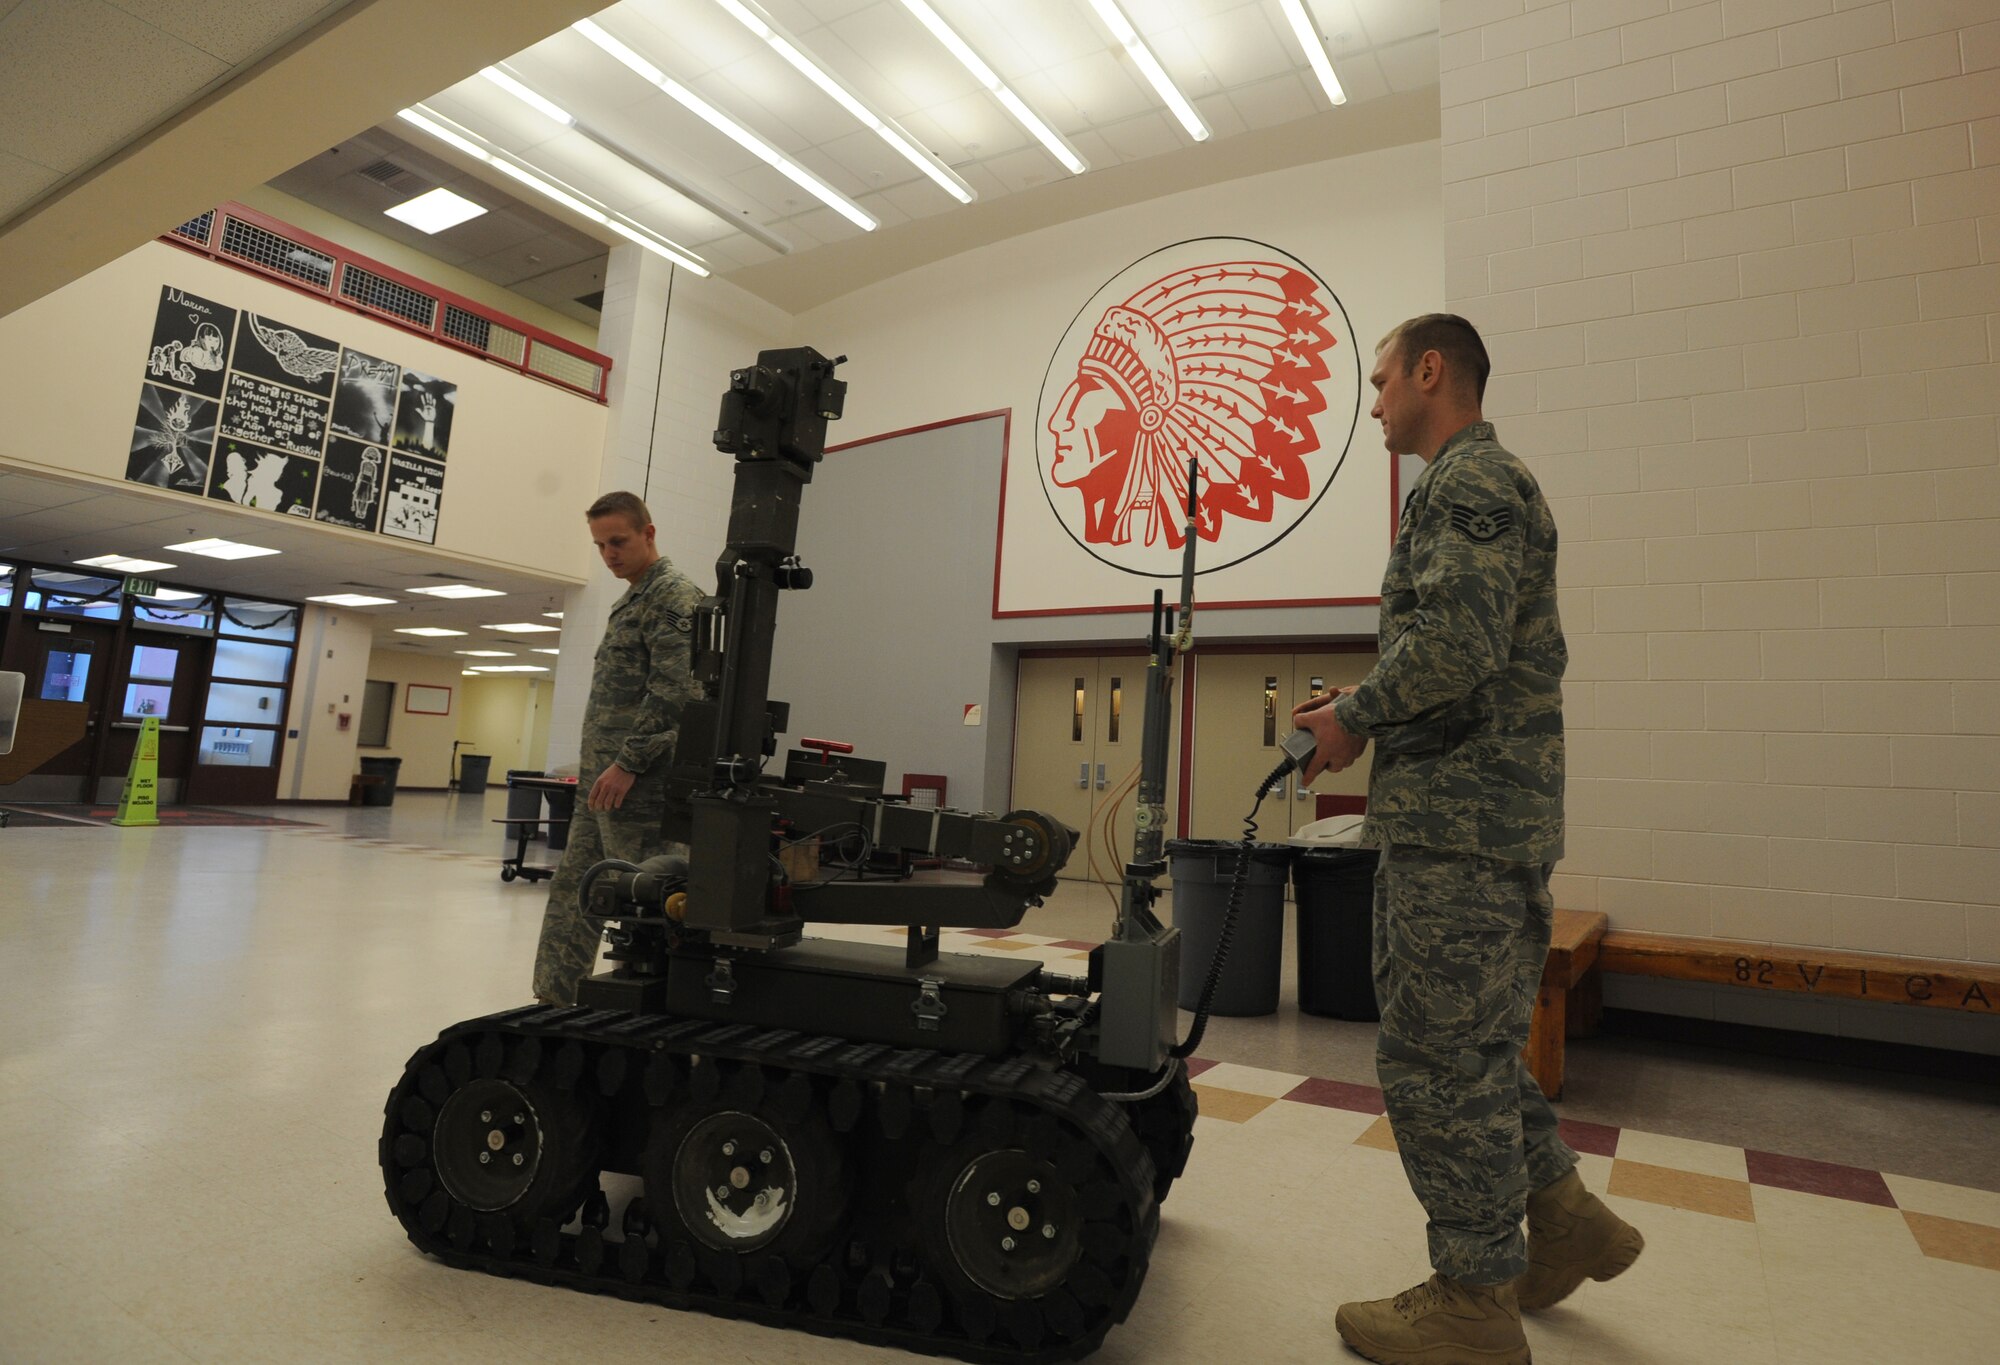 WASILLA, Alaska -- Staff Sergeants Matthew Hulsman and James Joiner, Elmendorf Explosive Ordnance Disposal unit, maneuver the bomb robot "Wolverine" through Wasilla High School to search for any traces of explosives Jan. 8. The Elmendorf EOD unit teamed up with the Anchorage and Wasilla Police Departments to absolve the bomb threat situation in the area. This was a significant moment in the military and local community relations under a no-notice, real world situation. (U.S. Air Force photo/Senior Airman Matthew Owens)